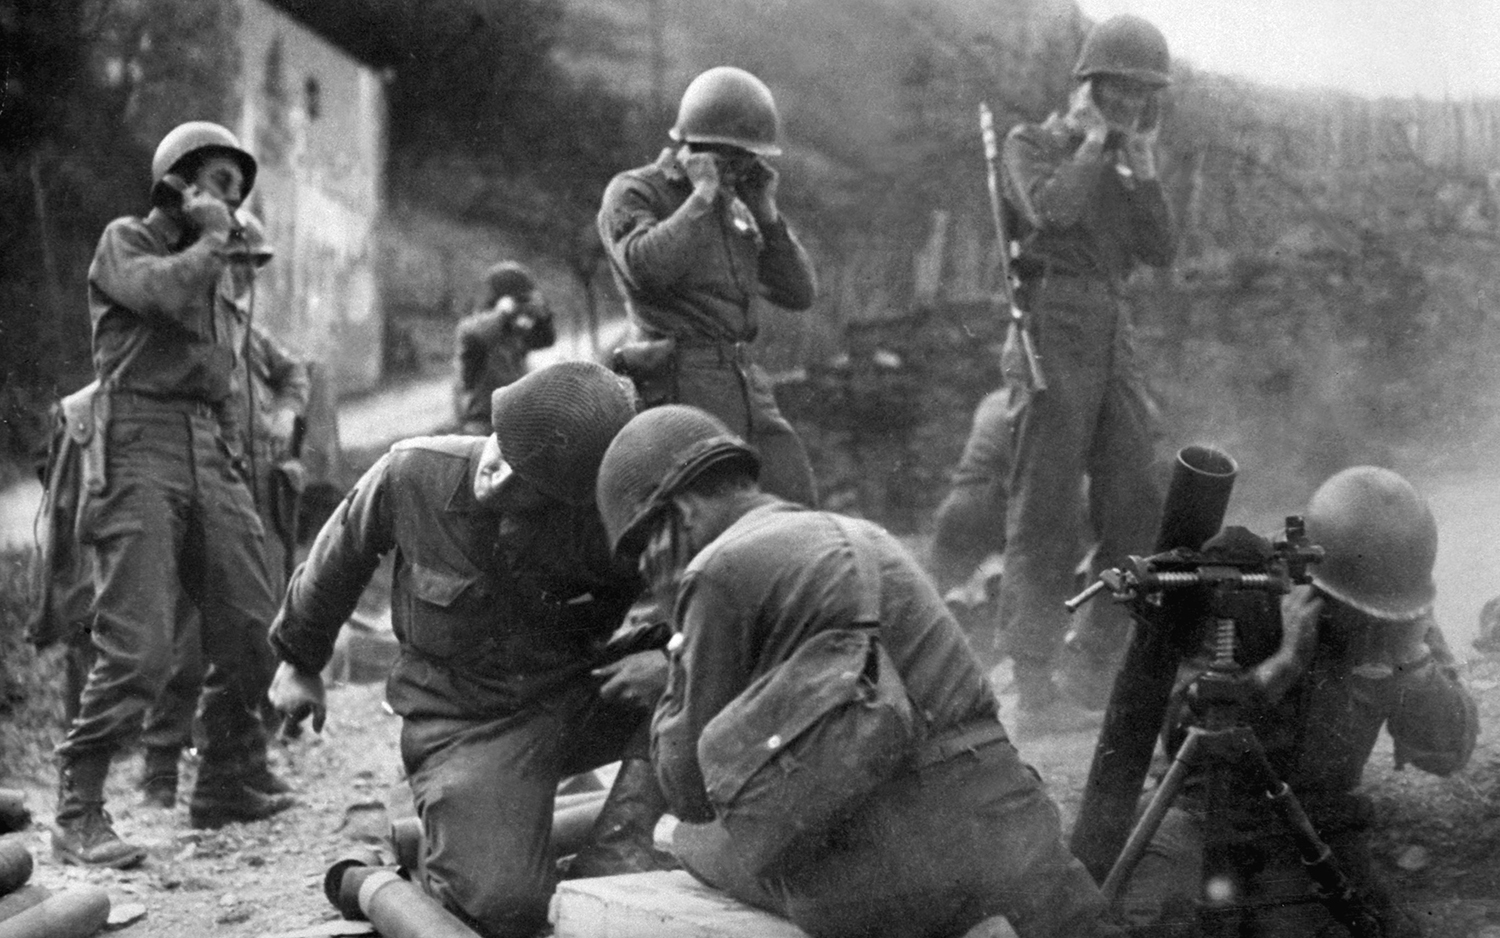 B&W Photo WW2 German Troops in Action with Mortar WWII Wehrmacht World War Two